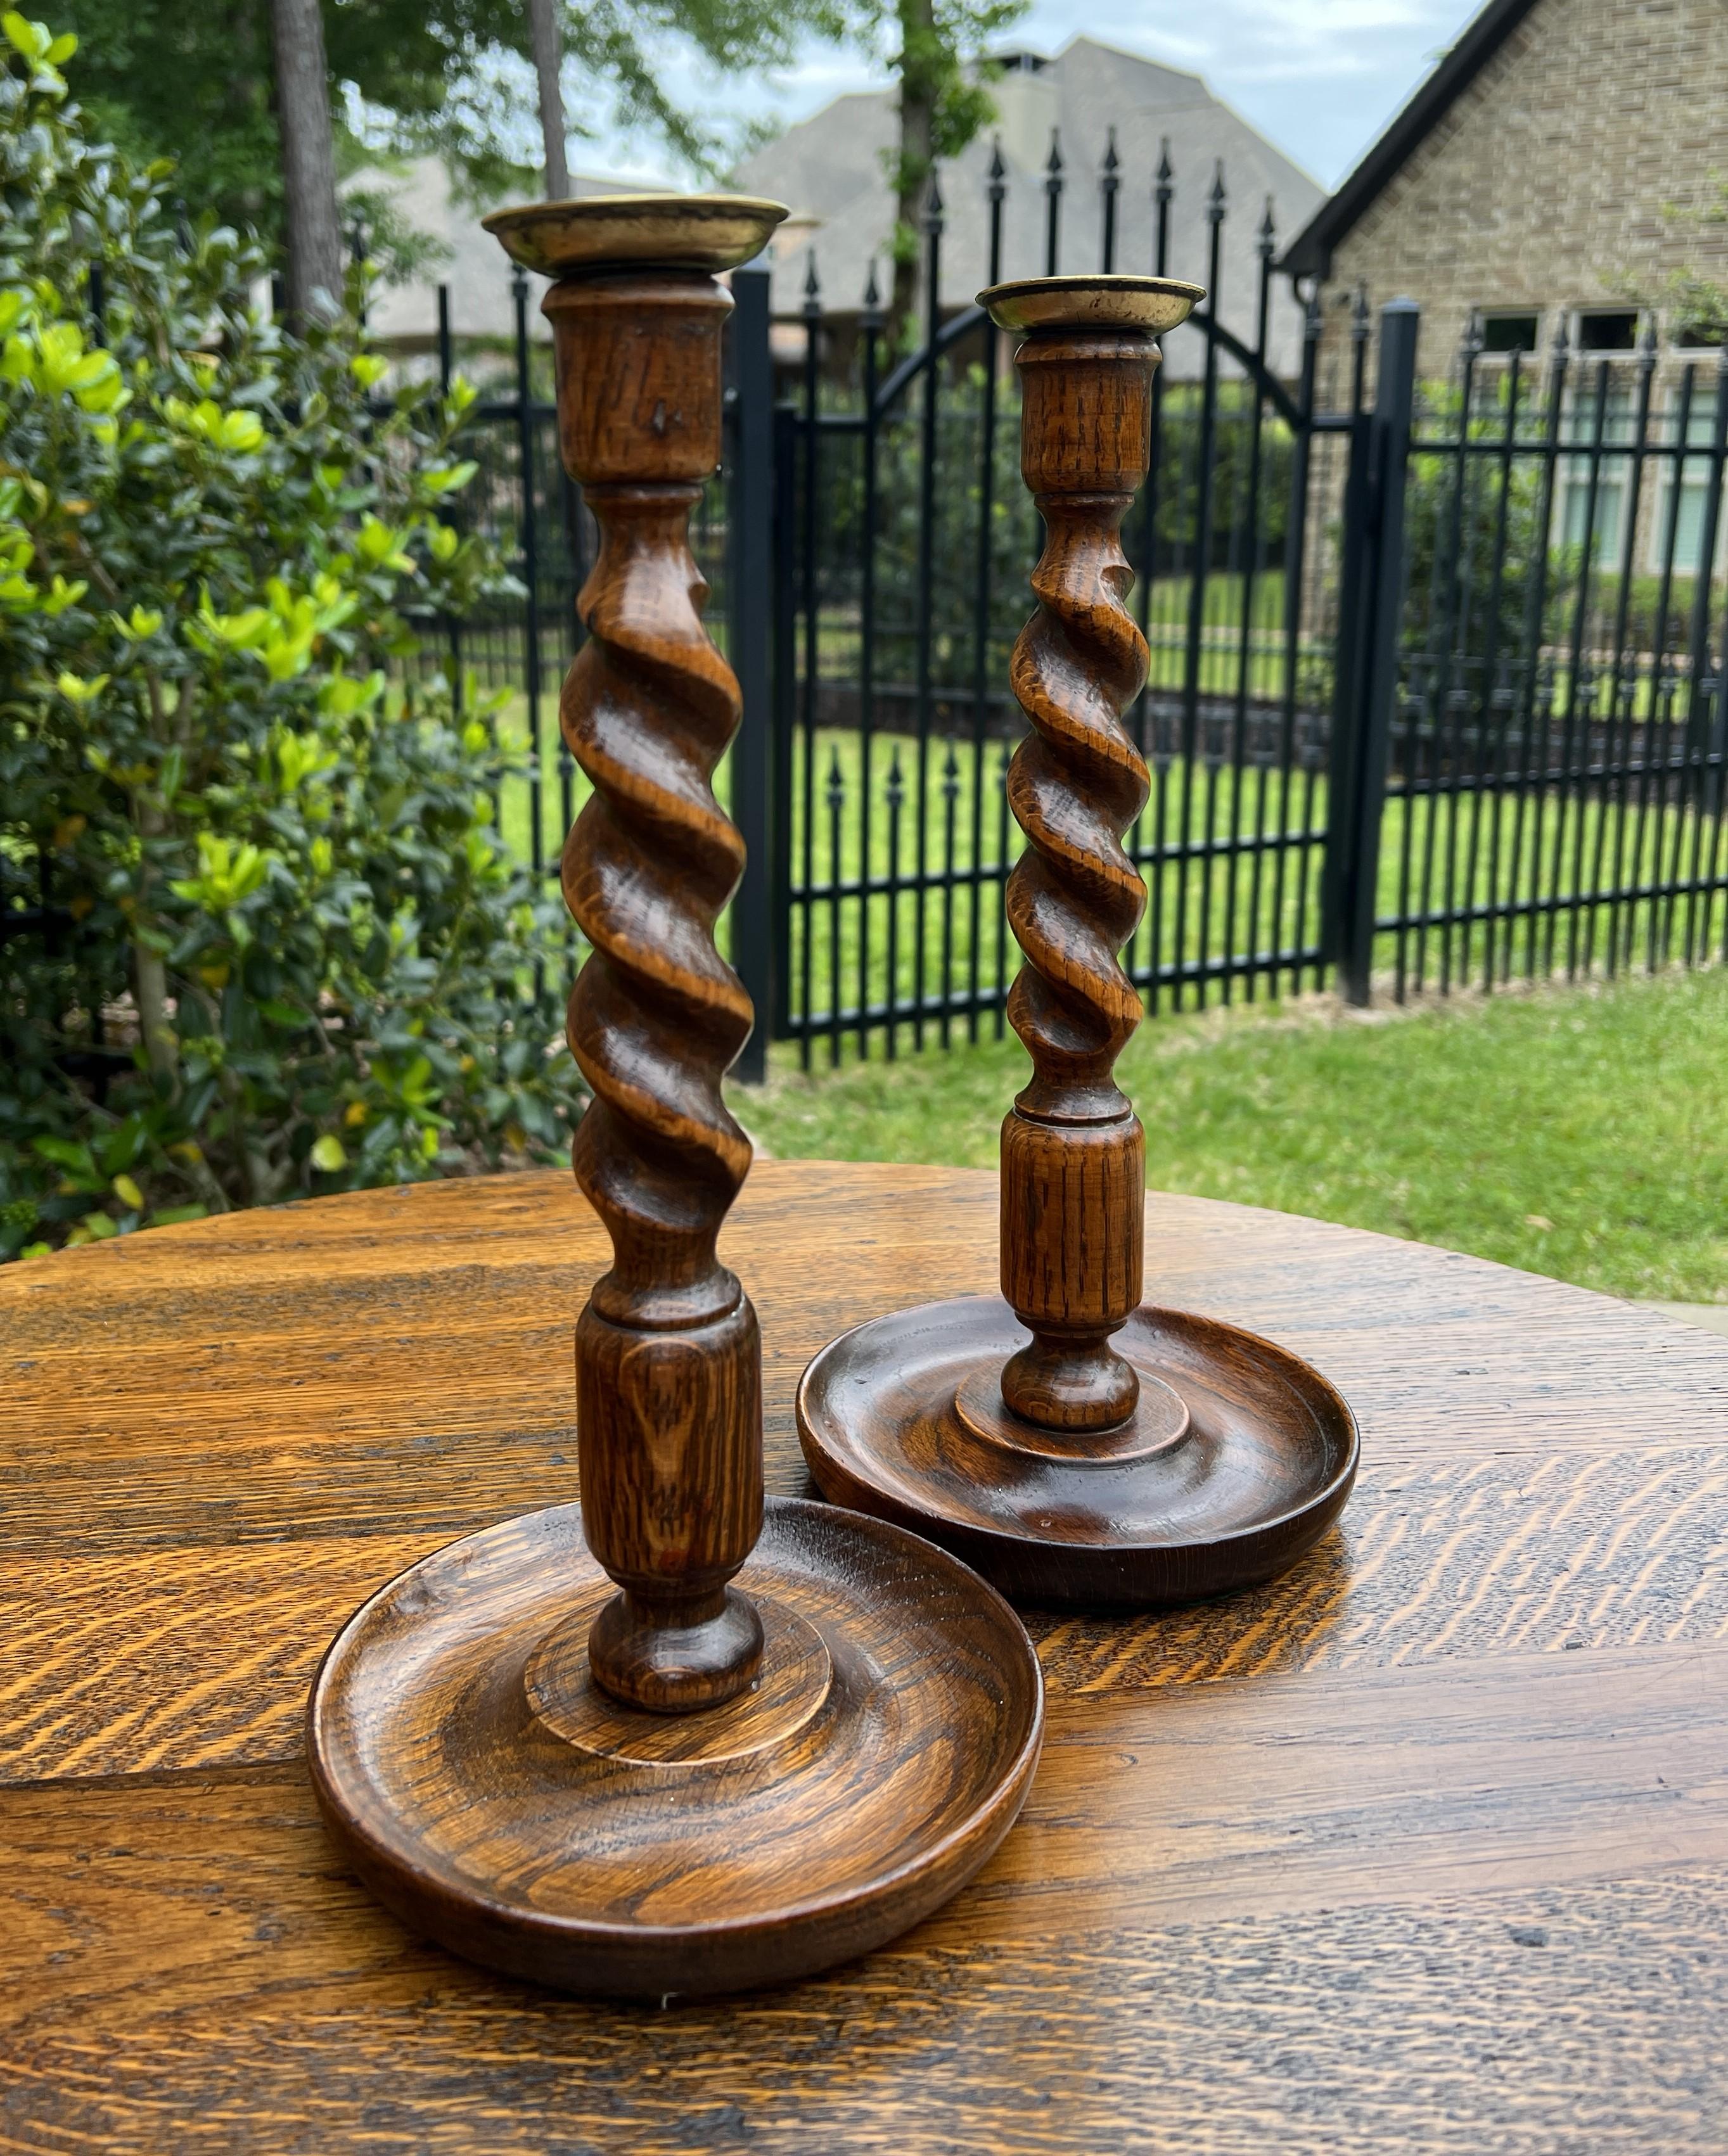 CHARMING Pair of Antique English Oak BARLEY TWIST Candlesticks Candle Holders c. 1930s

Beautiful twist with nice oak patina

12.5